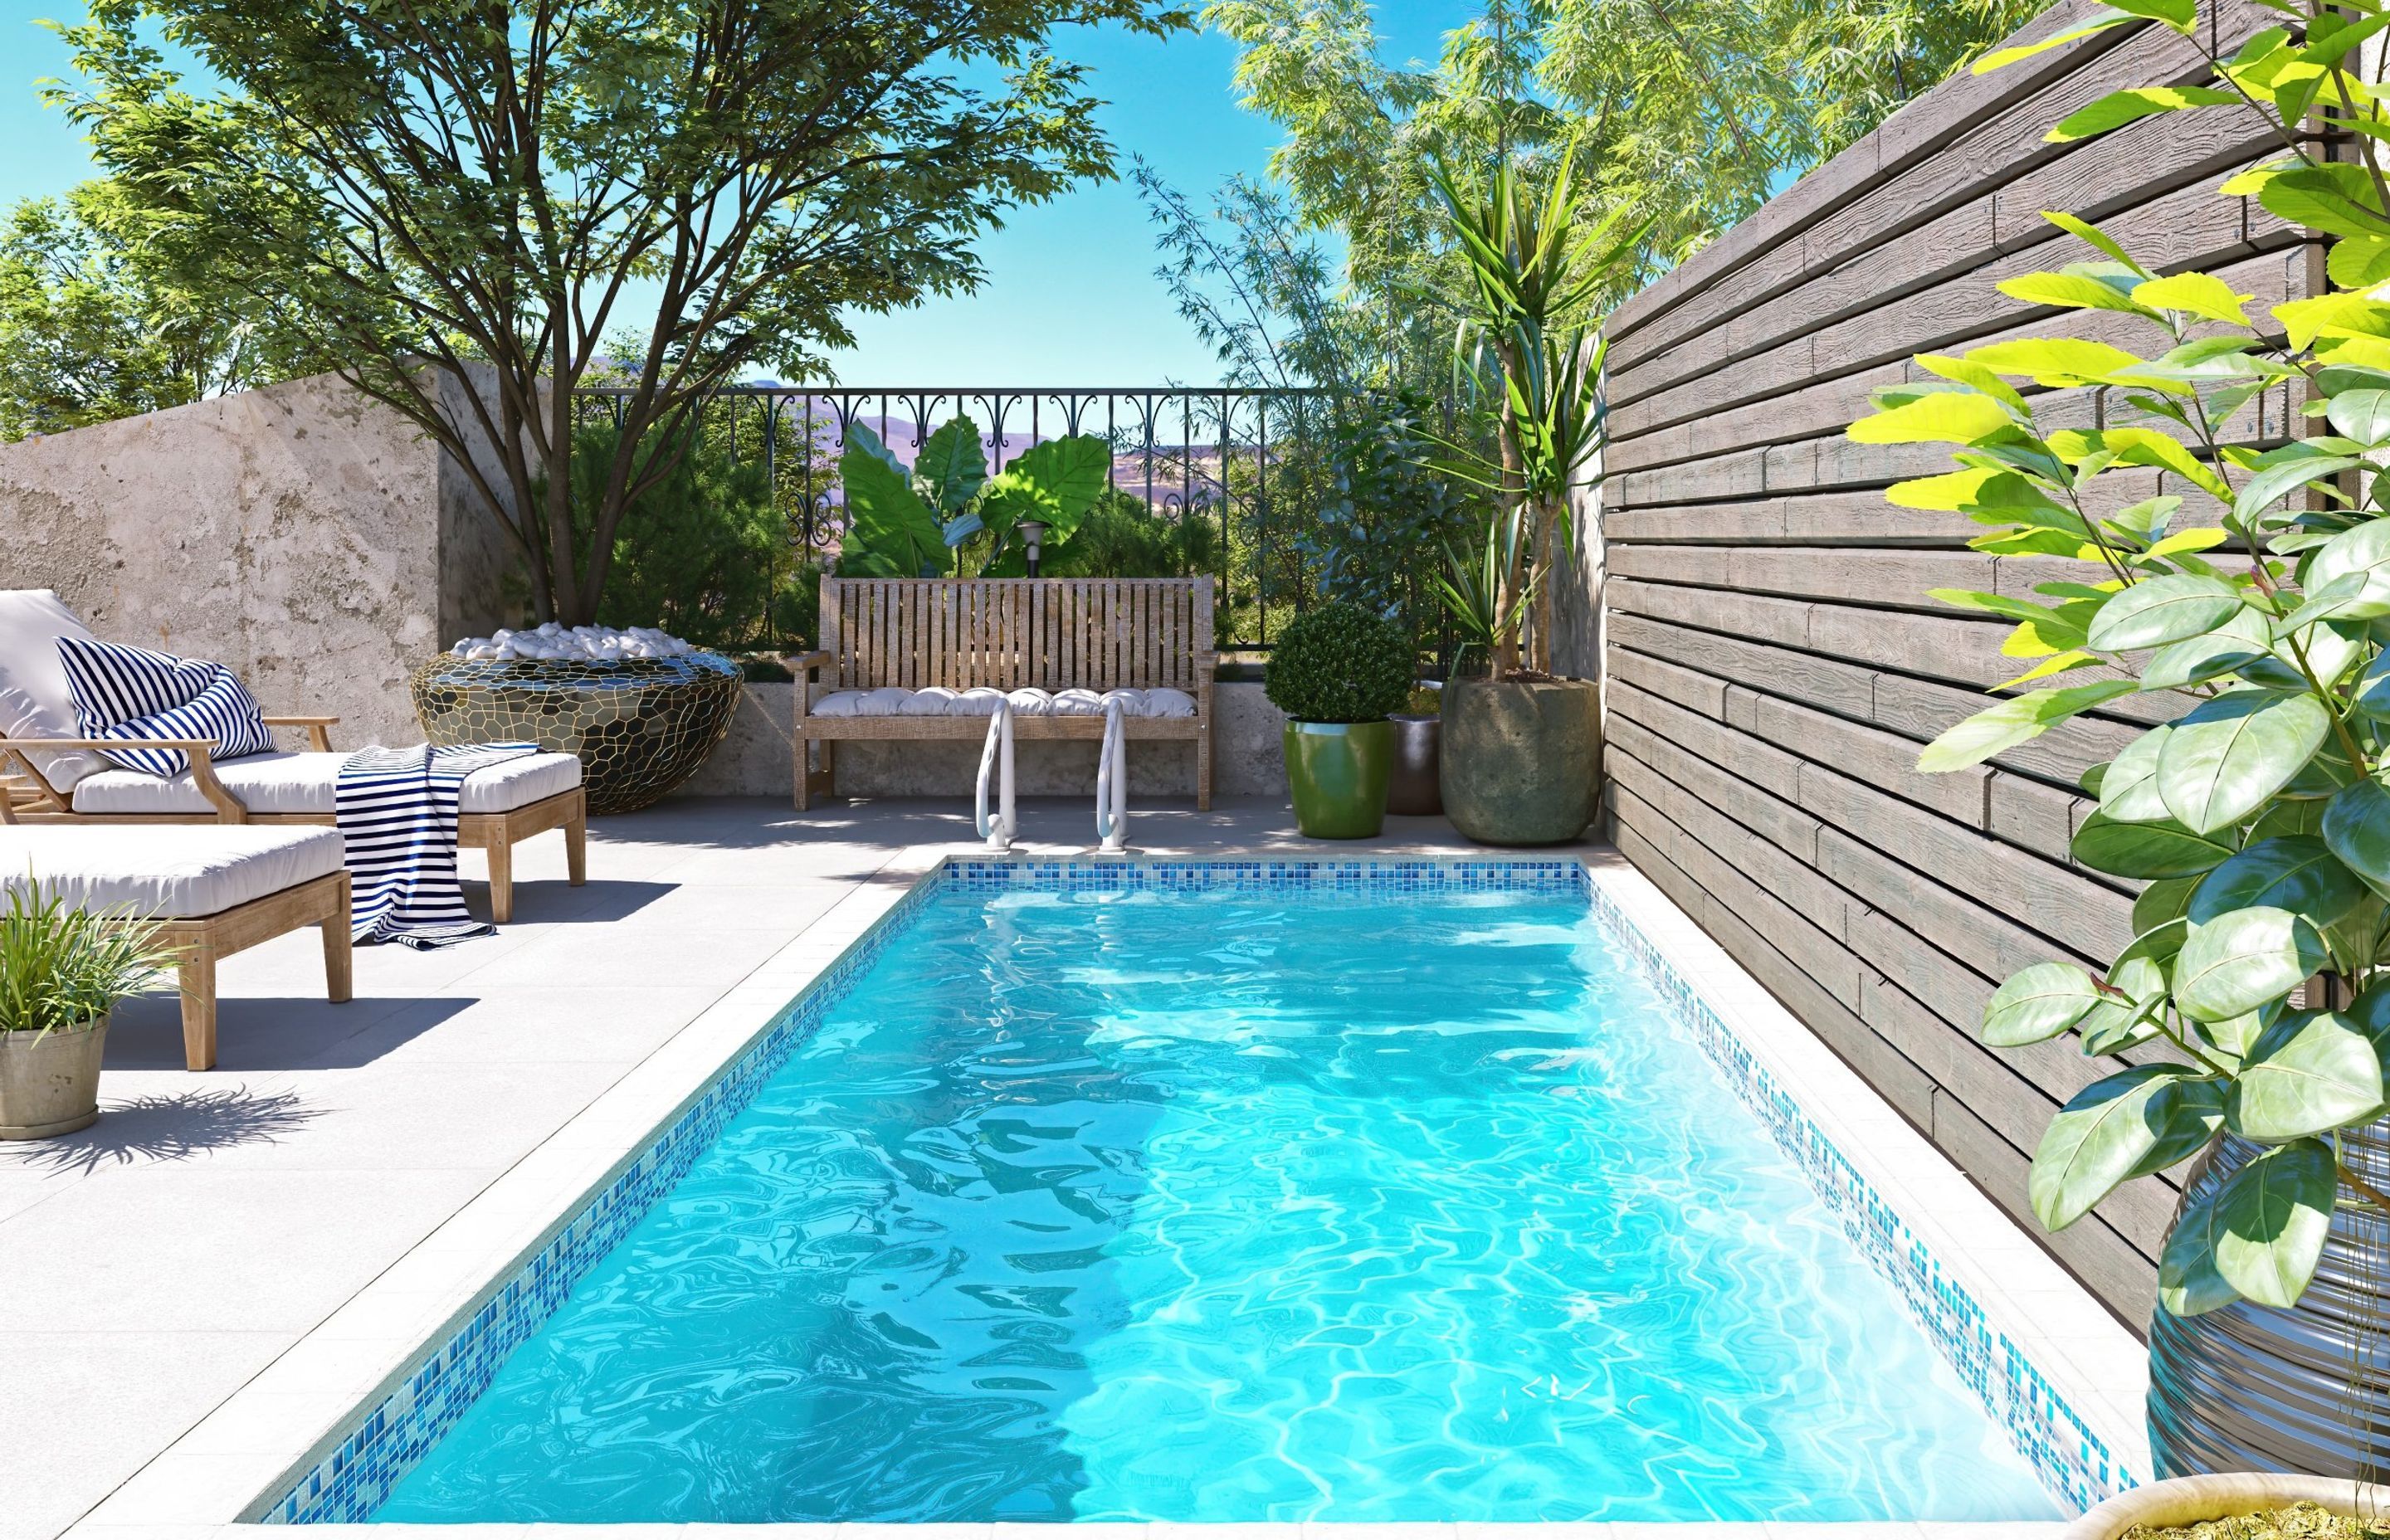 The Bonaire Pool from Poolpac features a porcelain tile finish at the waterline — a lovely touch of style.